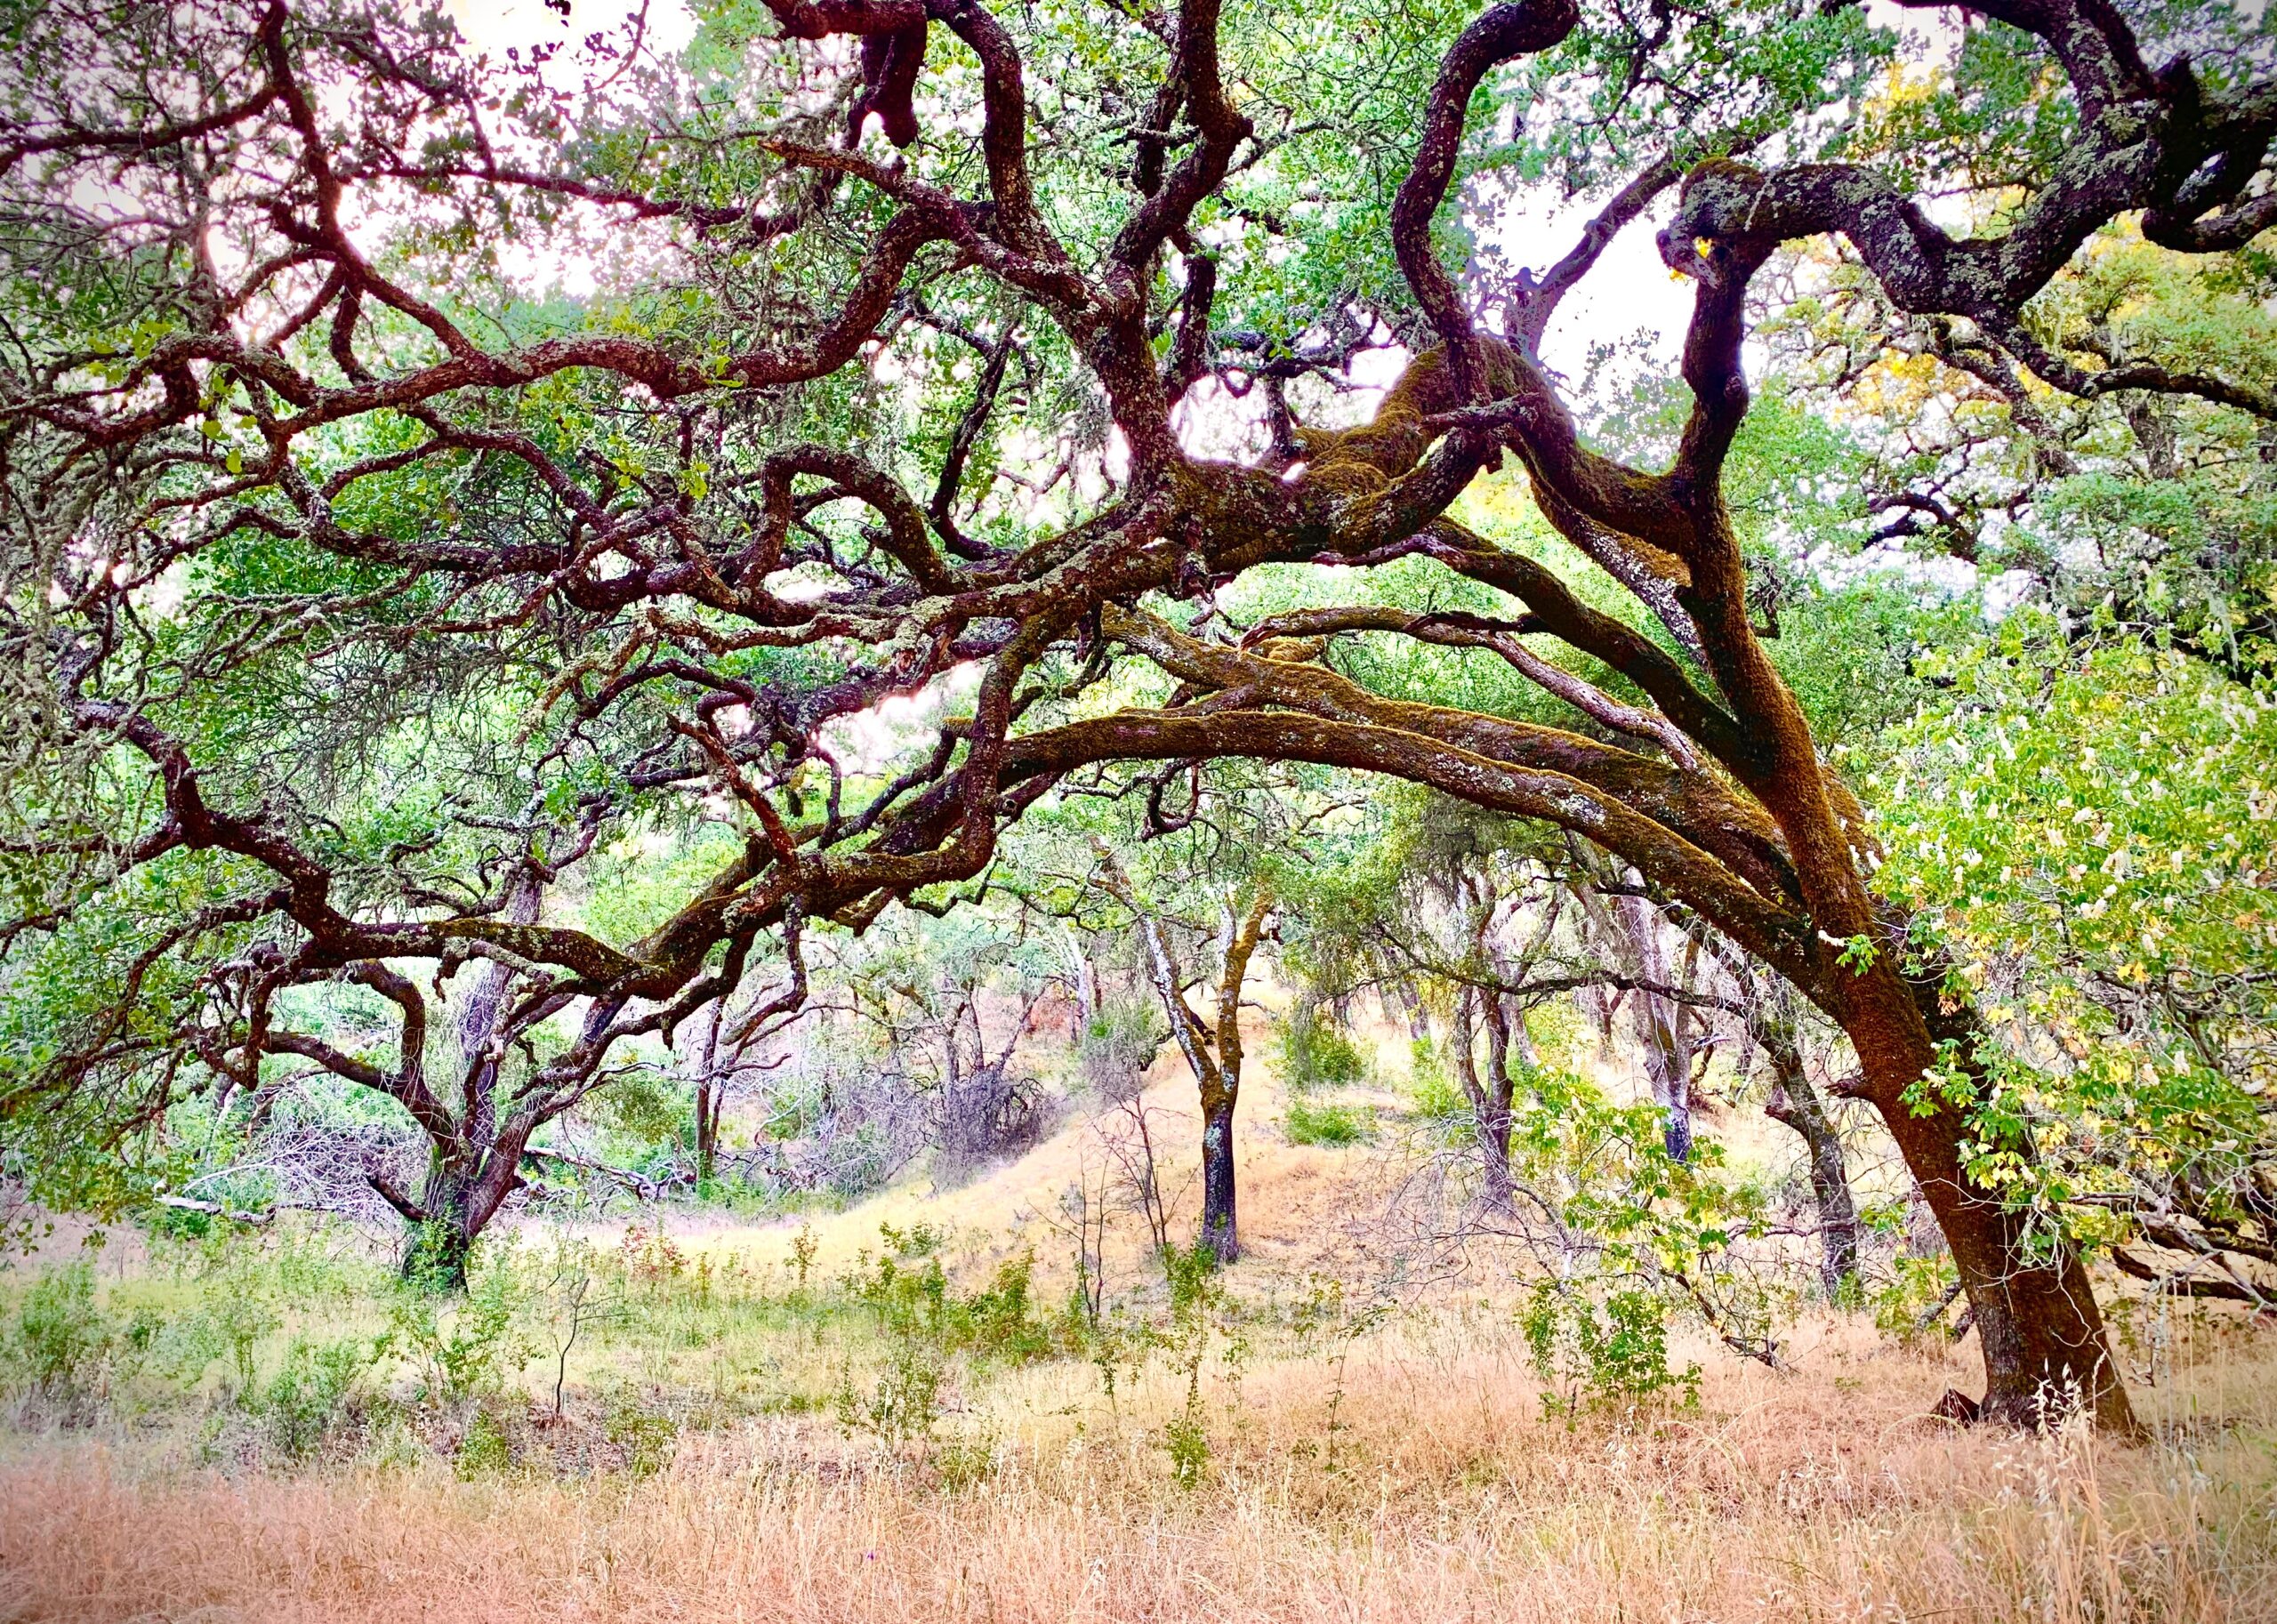 A large oak tree in the middle of a grassy field.